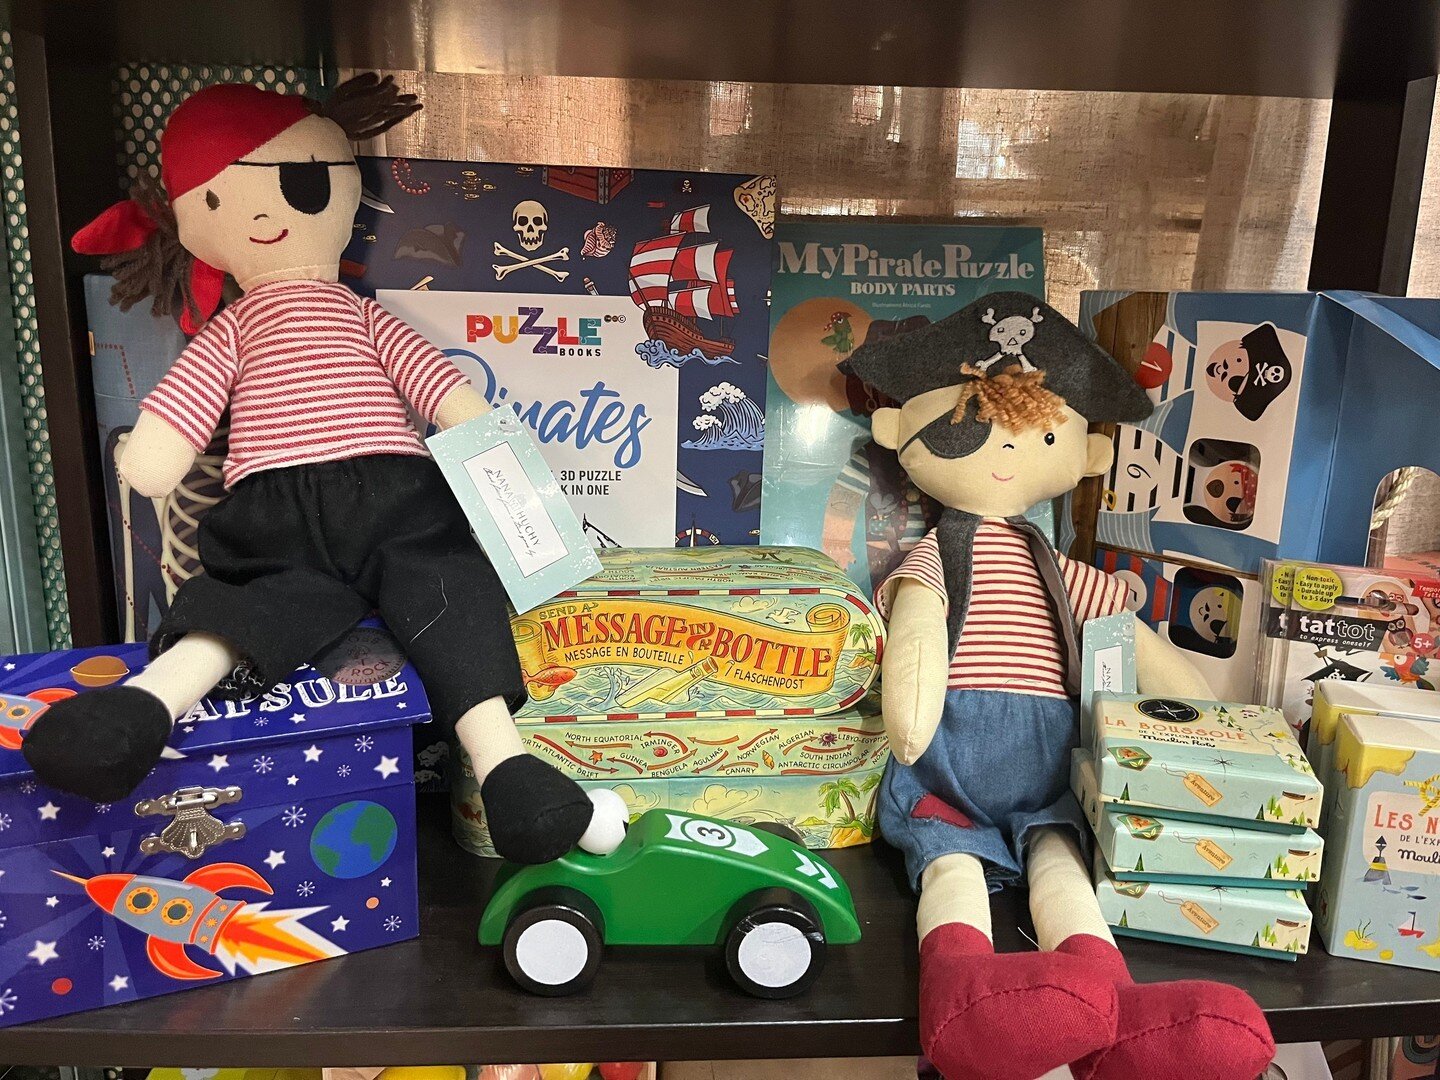 🏴&zwj;☠️ Ahoy, me hearties! Set sail for adventure with pirate toys that'll shiver your timbers, available at The Vintage Toy Box! 🦜🌊

For the young buccaneers dreaming of buried treasures and high-seas escapades, our collection of pirate toys is 